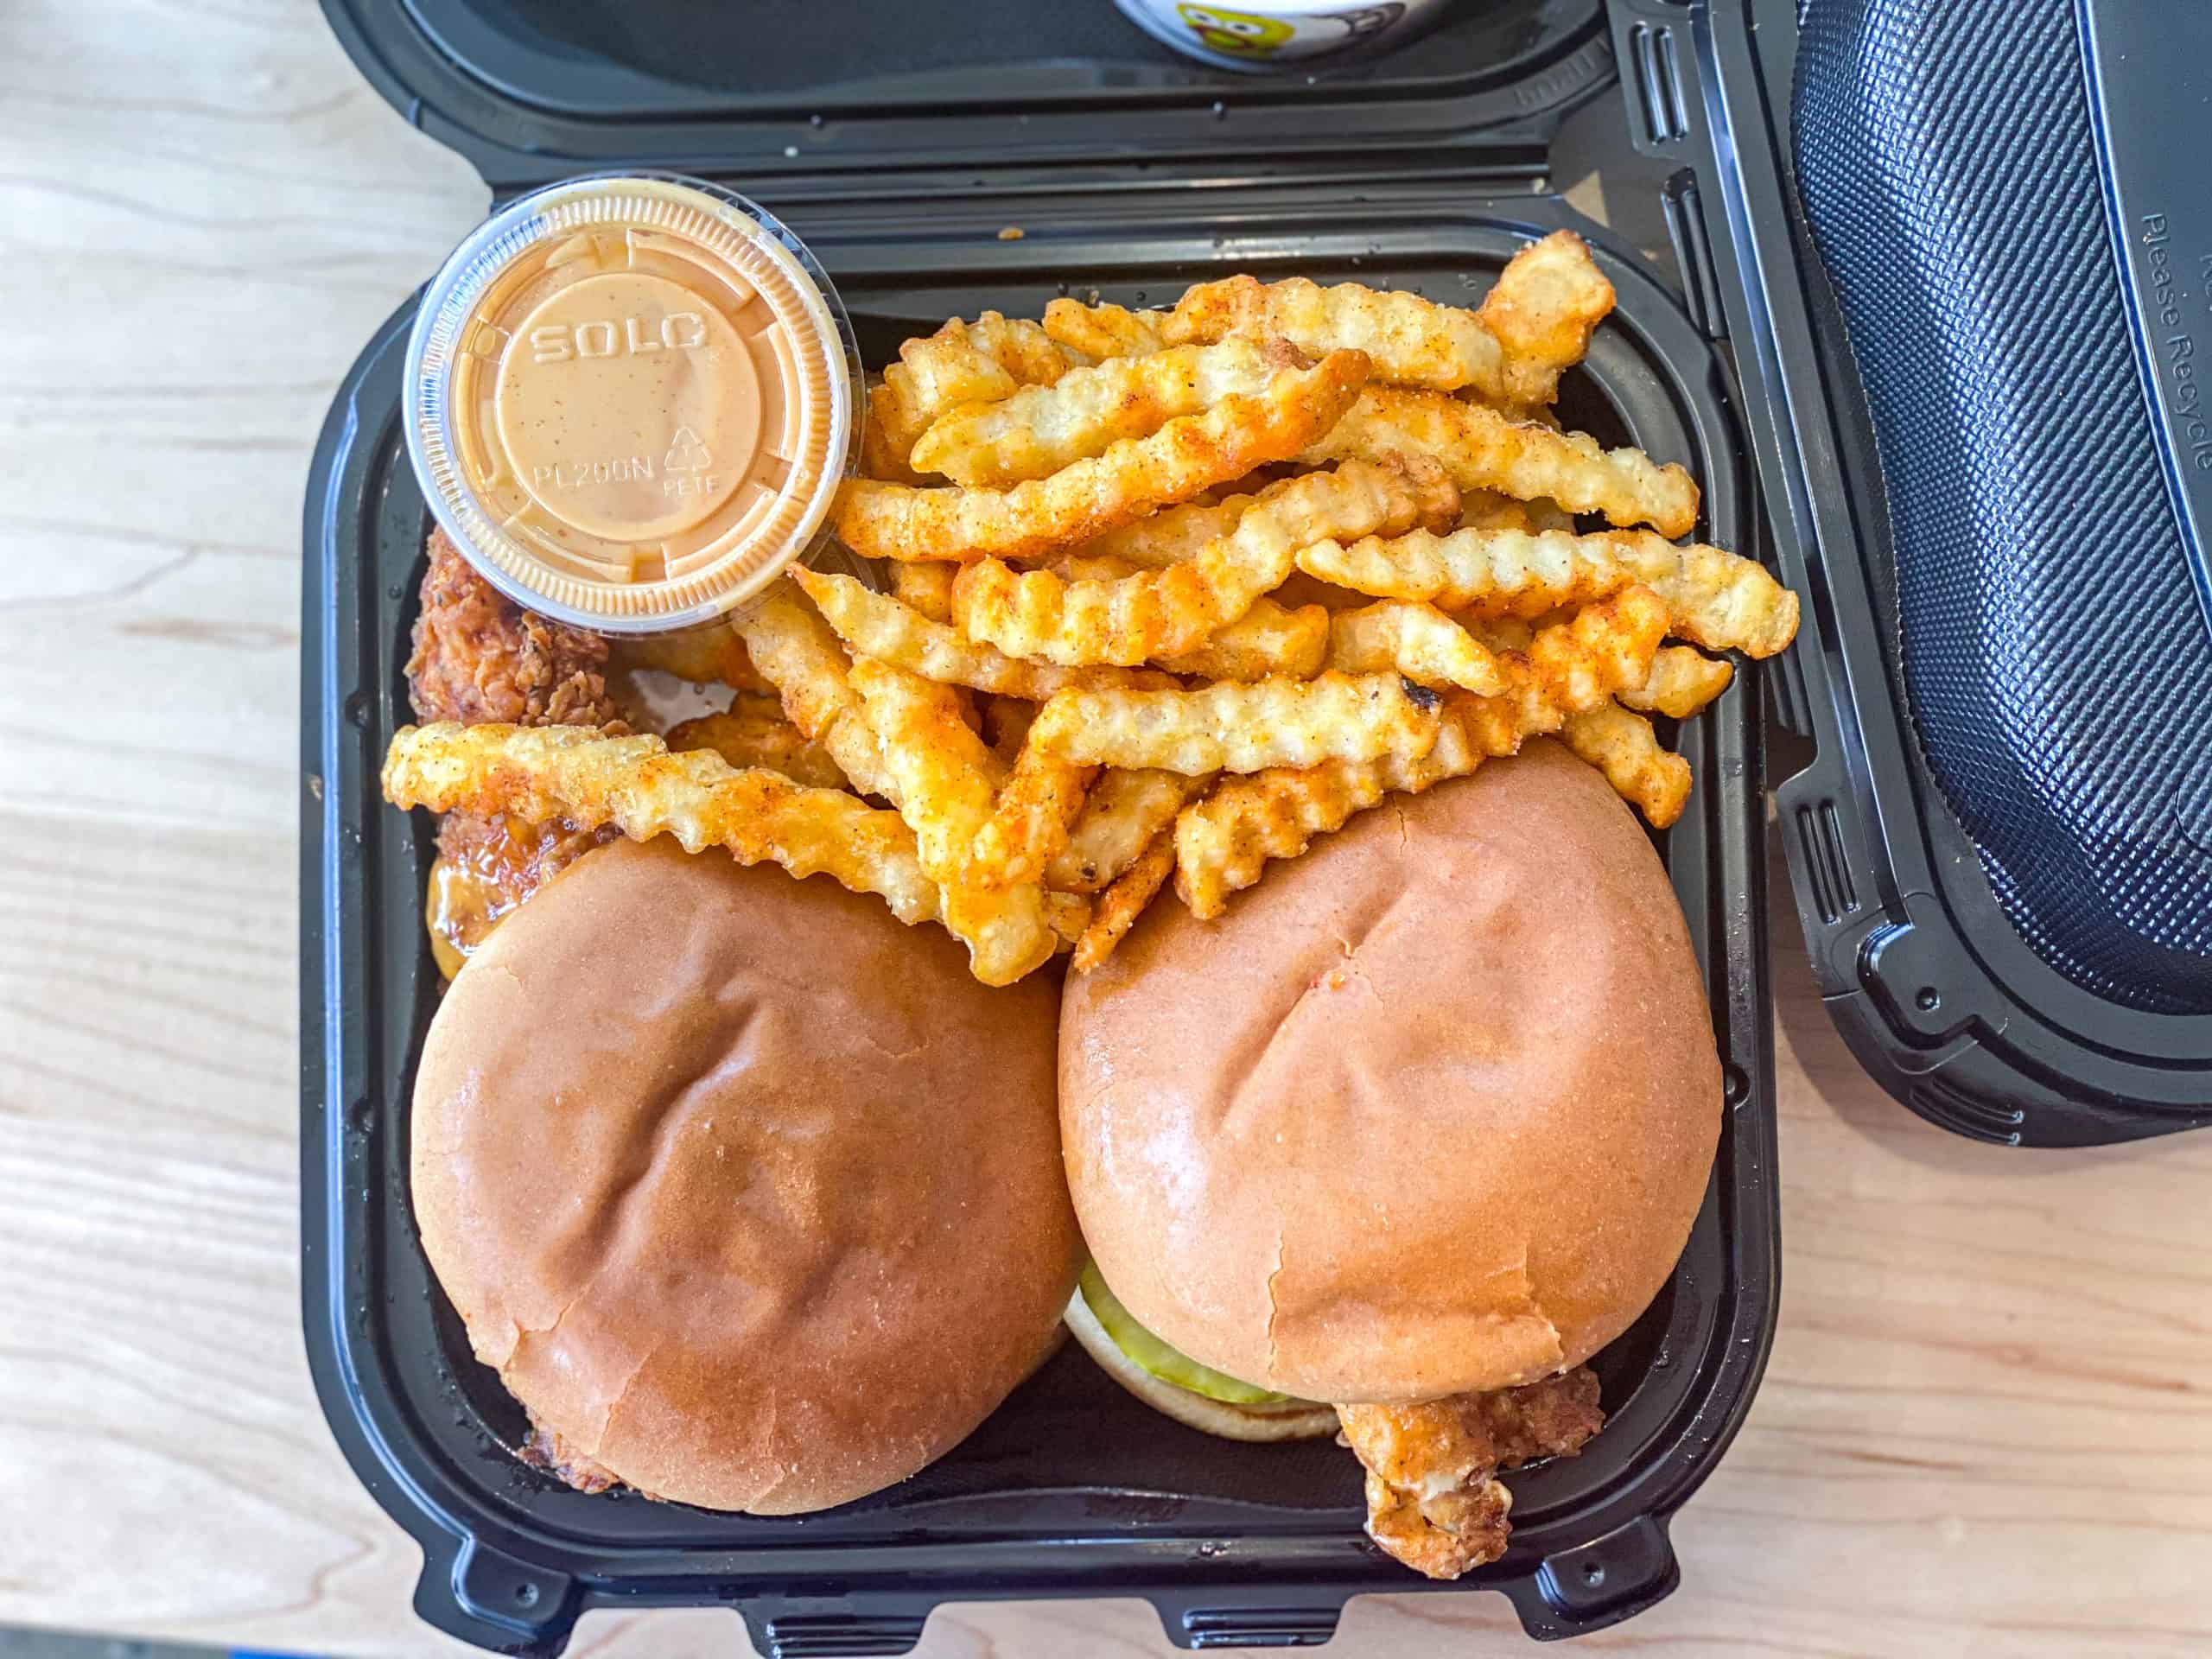 Top shot of dave's sauce with crinkle cut french fries and Nashville style hot chicken sandwiches.